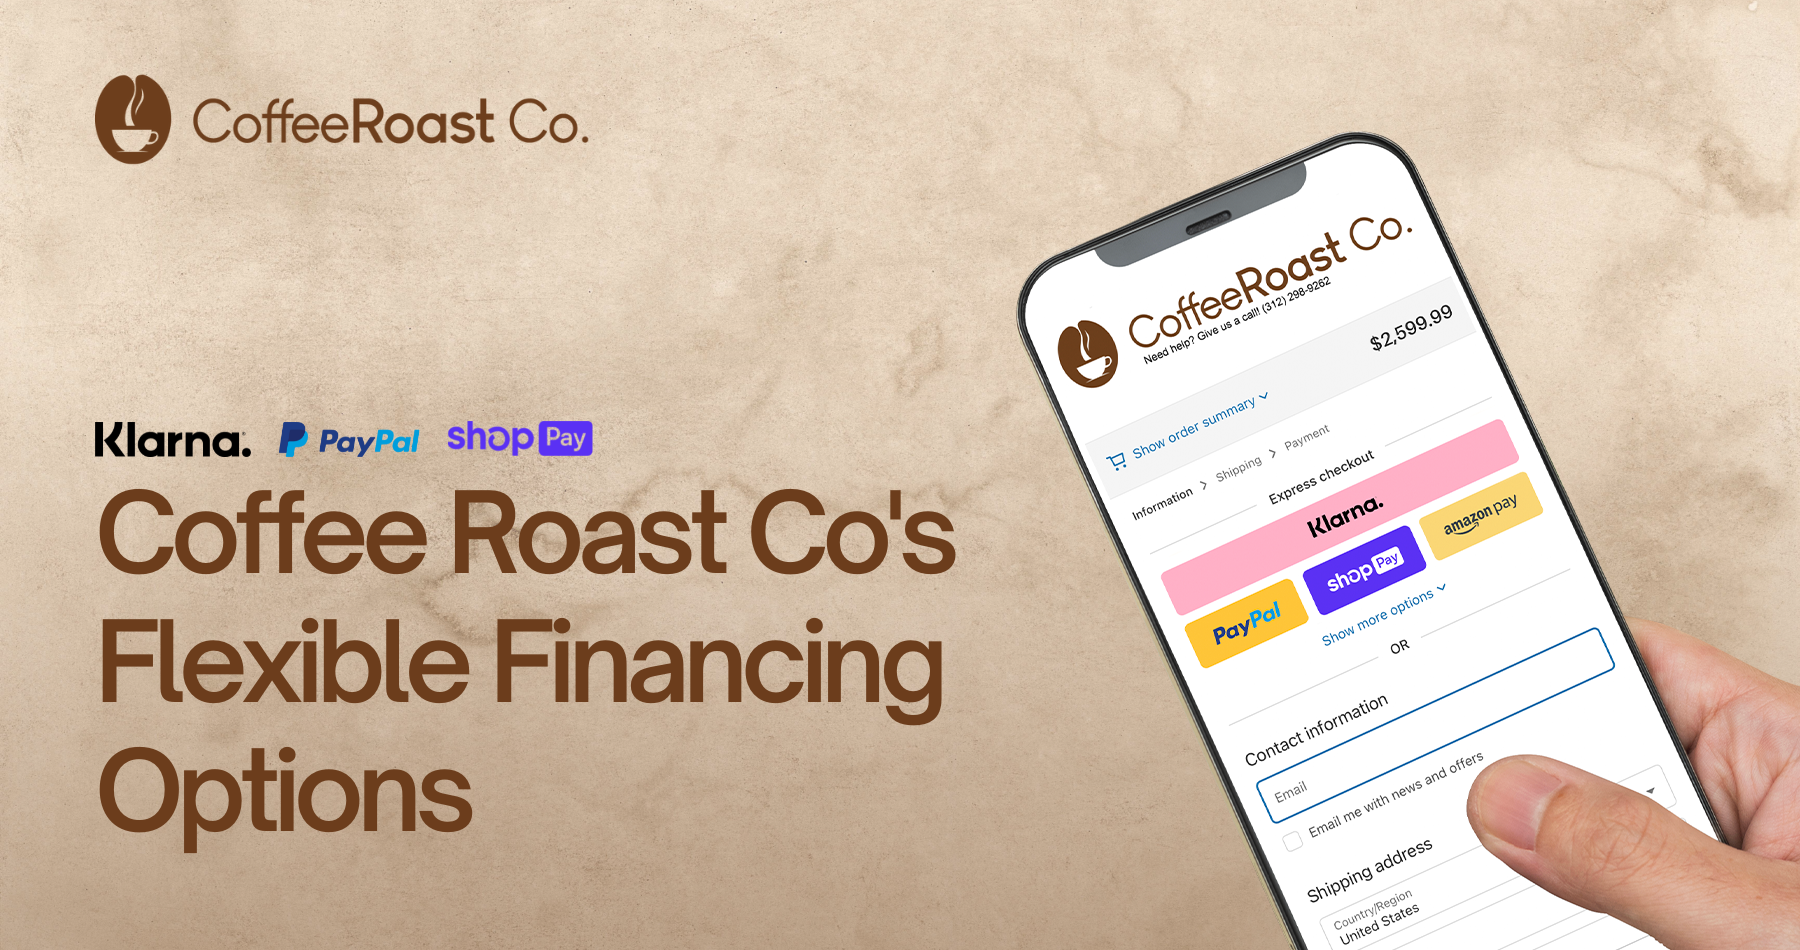 Have the Perfect Coffee Experience with CoffeeRoast Co.'s Flexible Financing Options